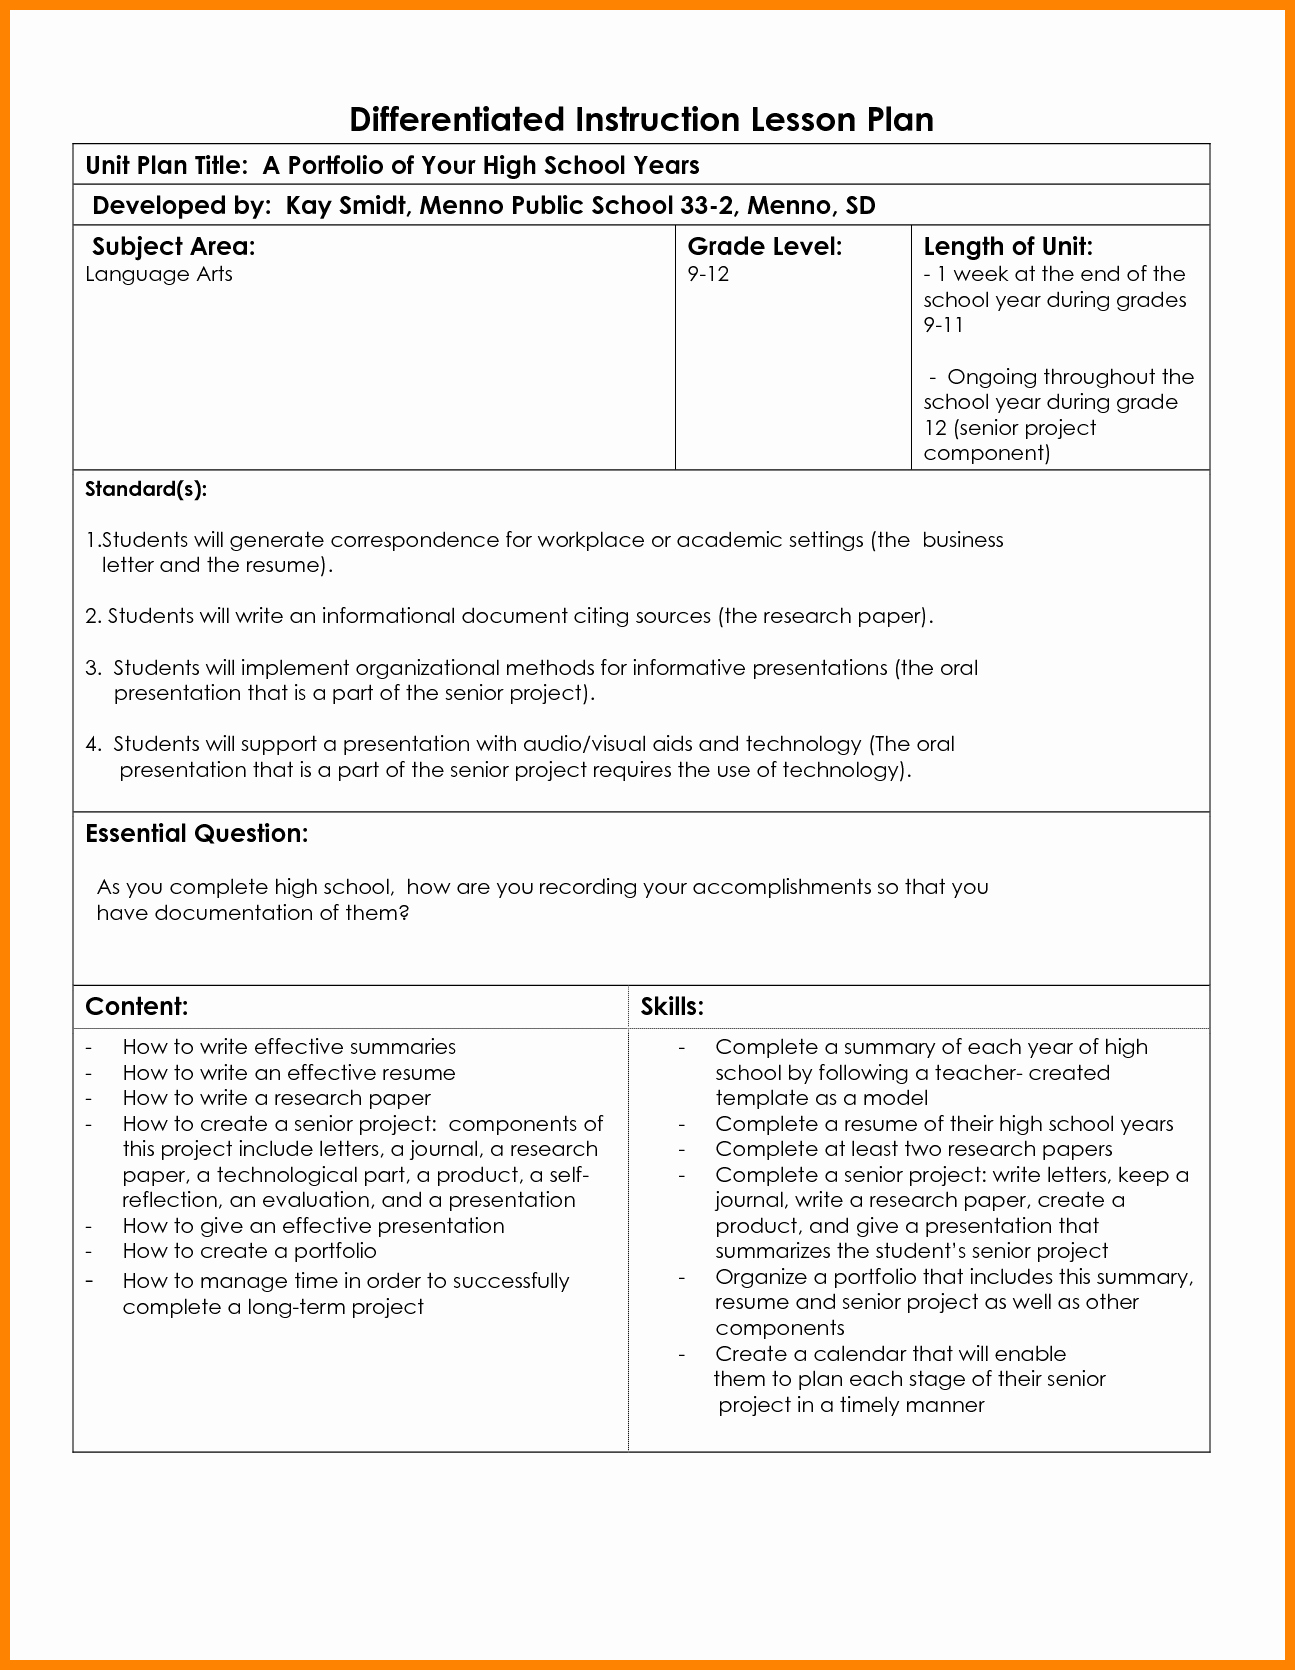 Differentiated Instruction Lesson Plan Template Lovely 15 Differentiated Lesson Plan Template